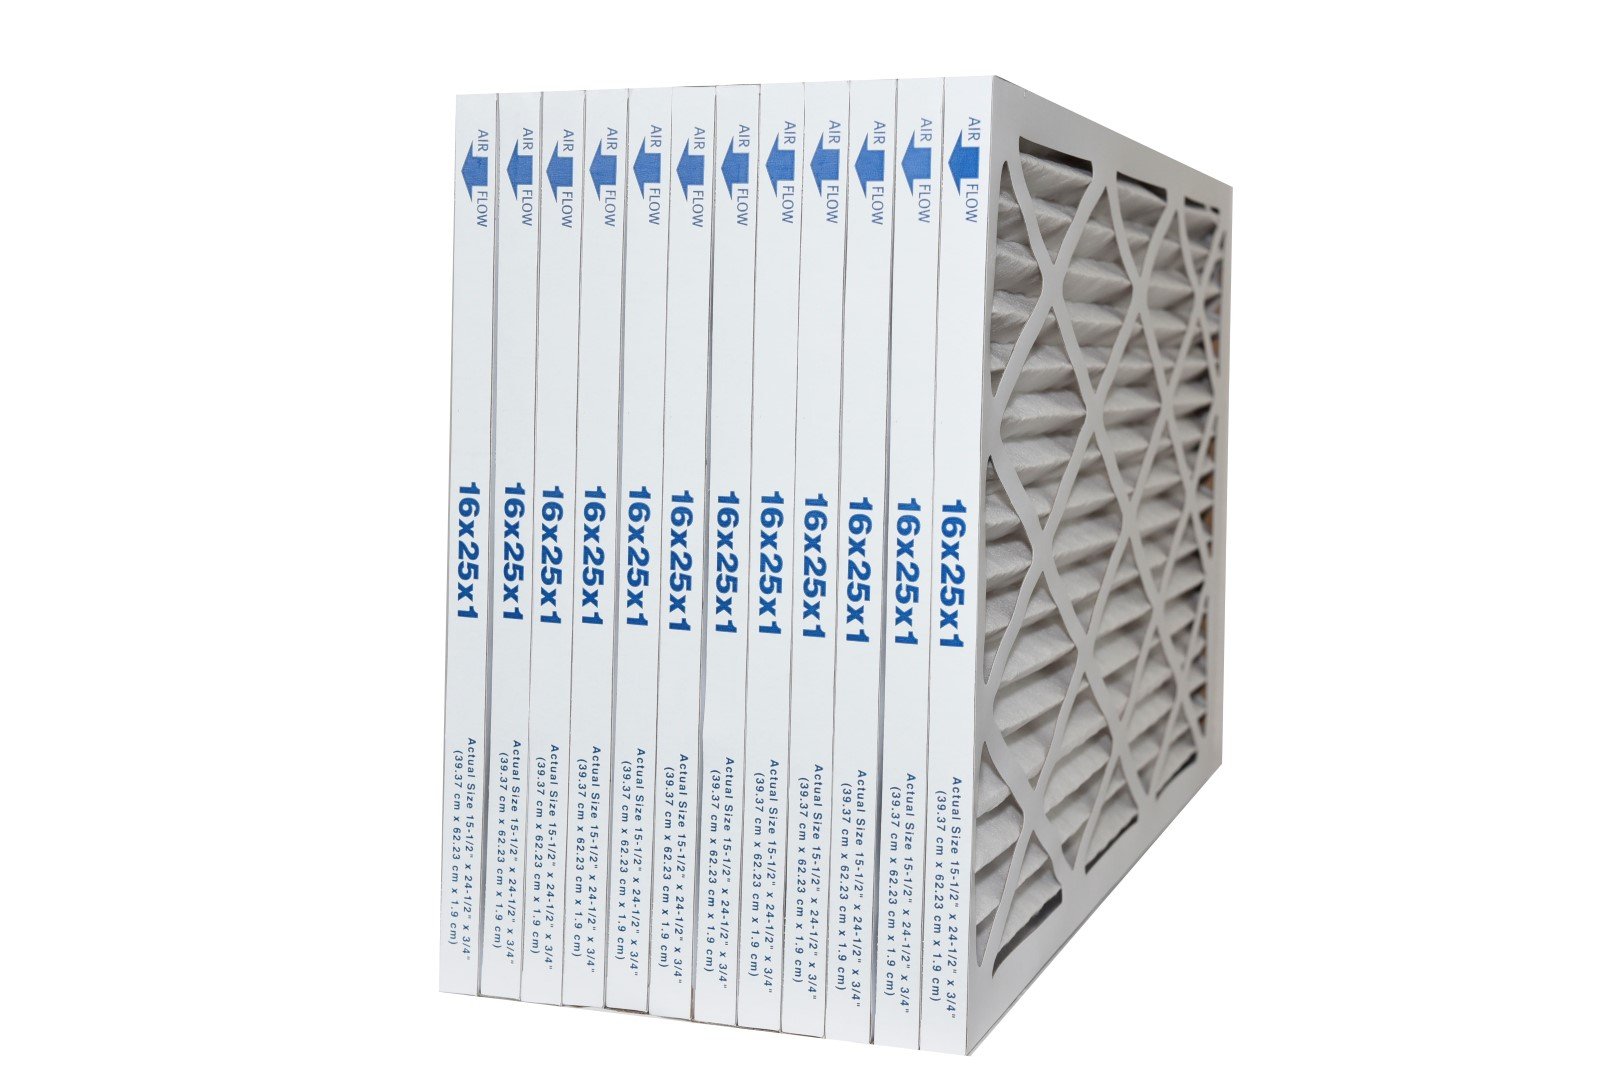 16x25x1 MERV 13 Furnace Air Filter, Pleated Material. Case of 12